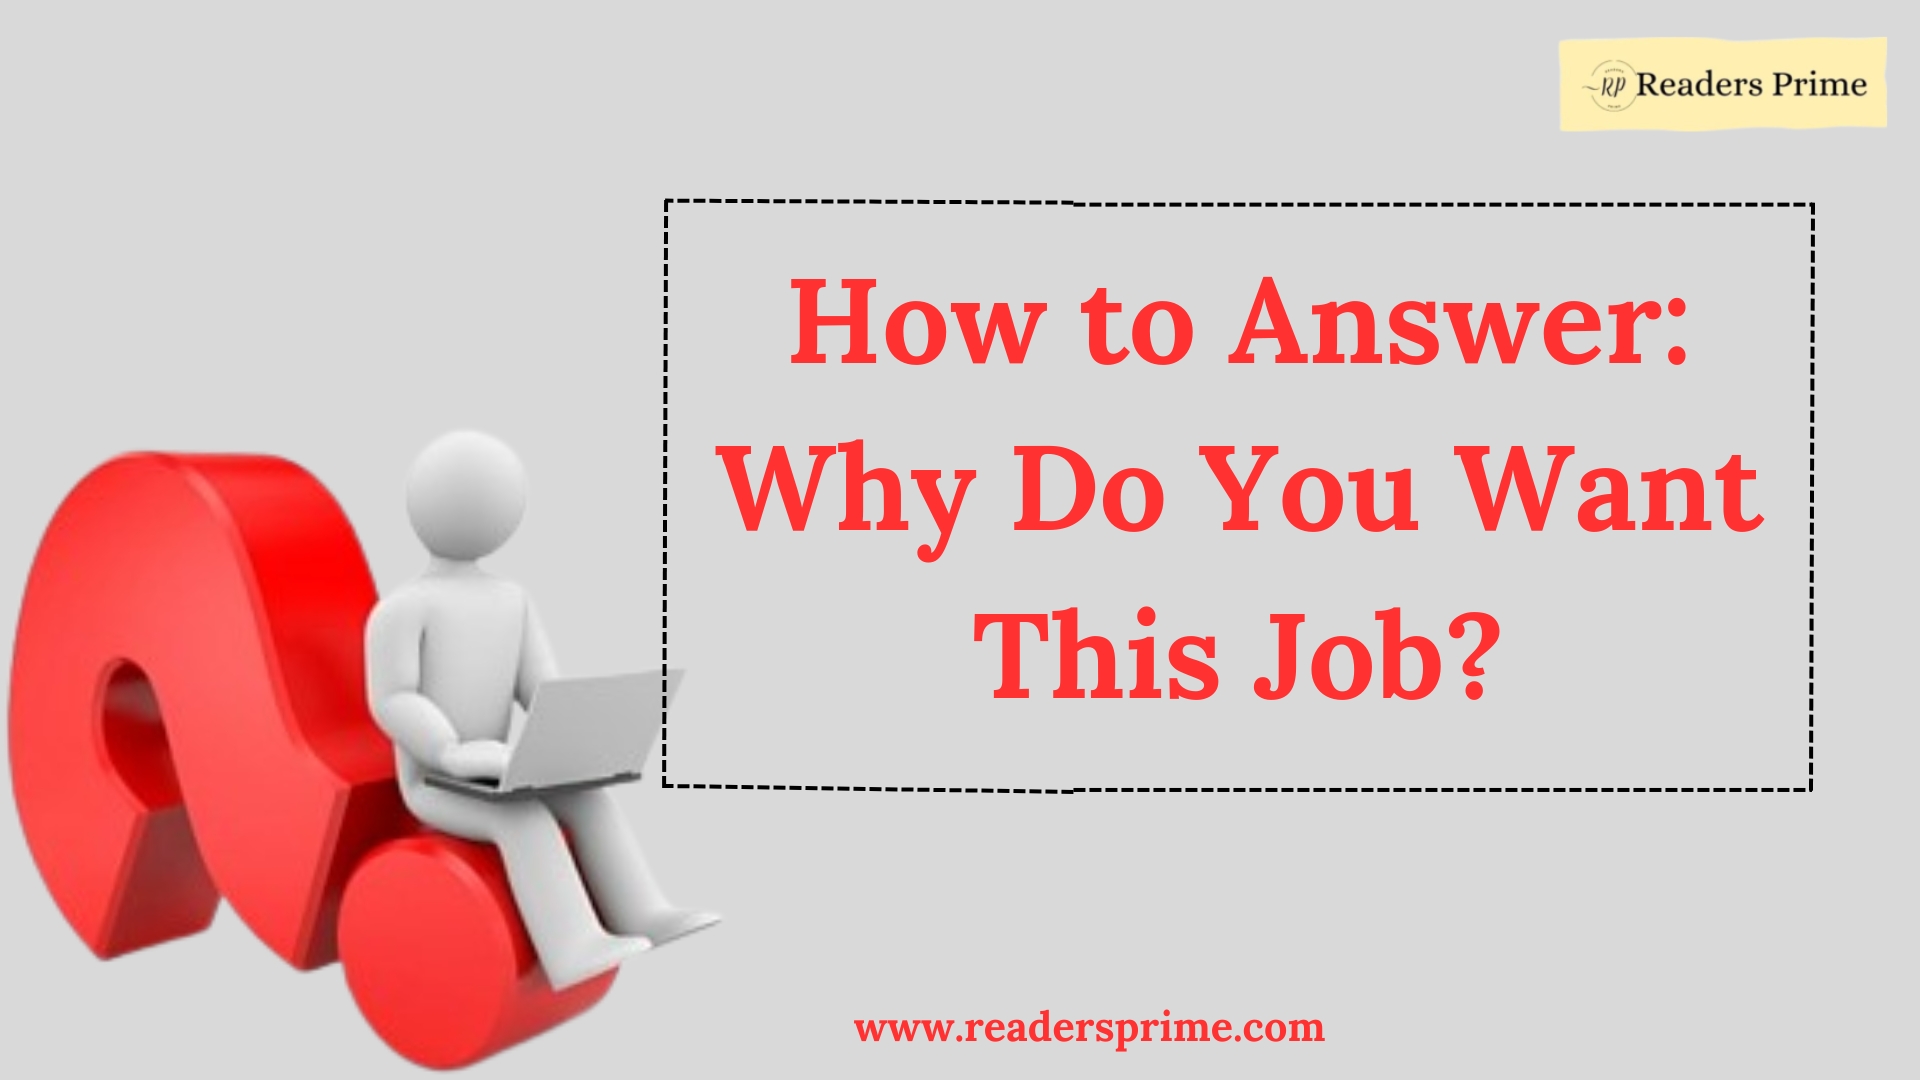 How to Answer: Why Do You Want This Job?